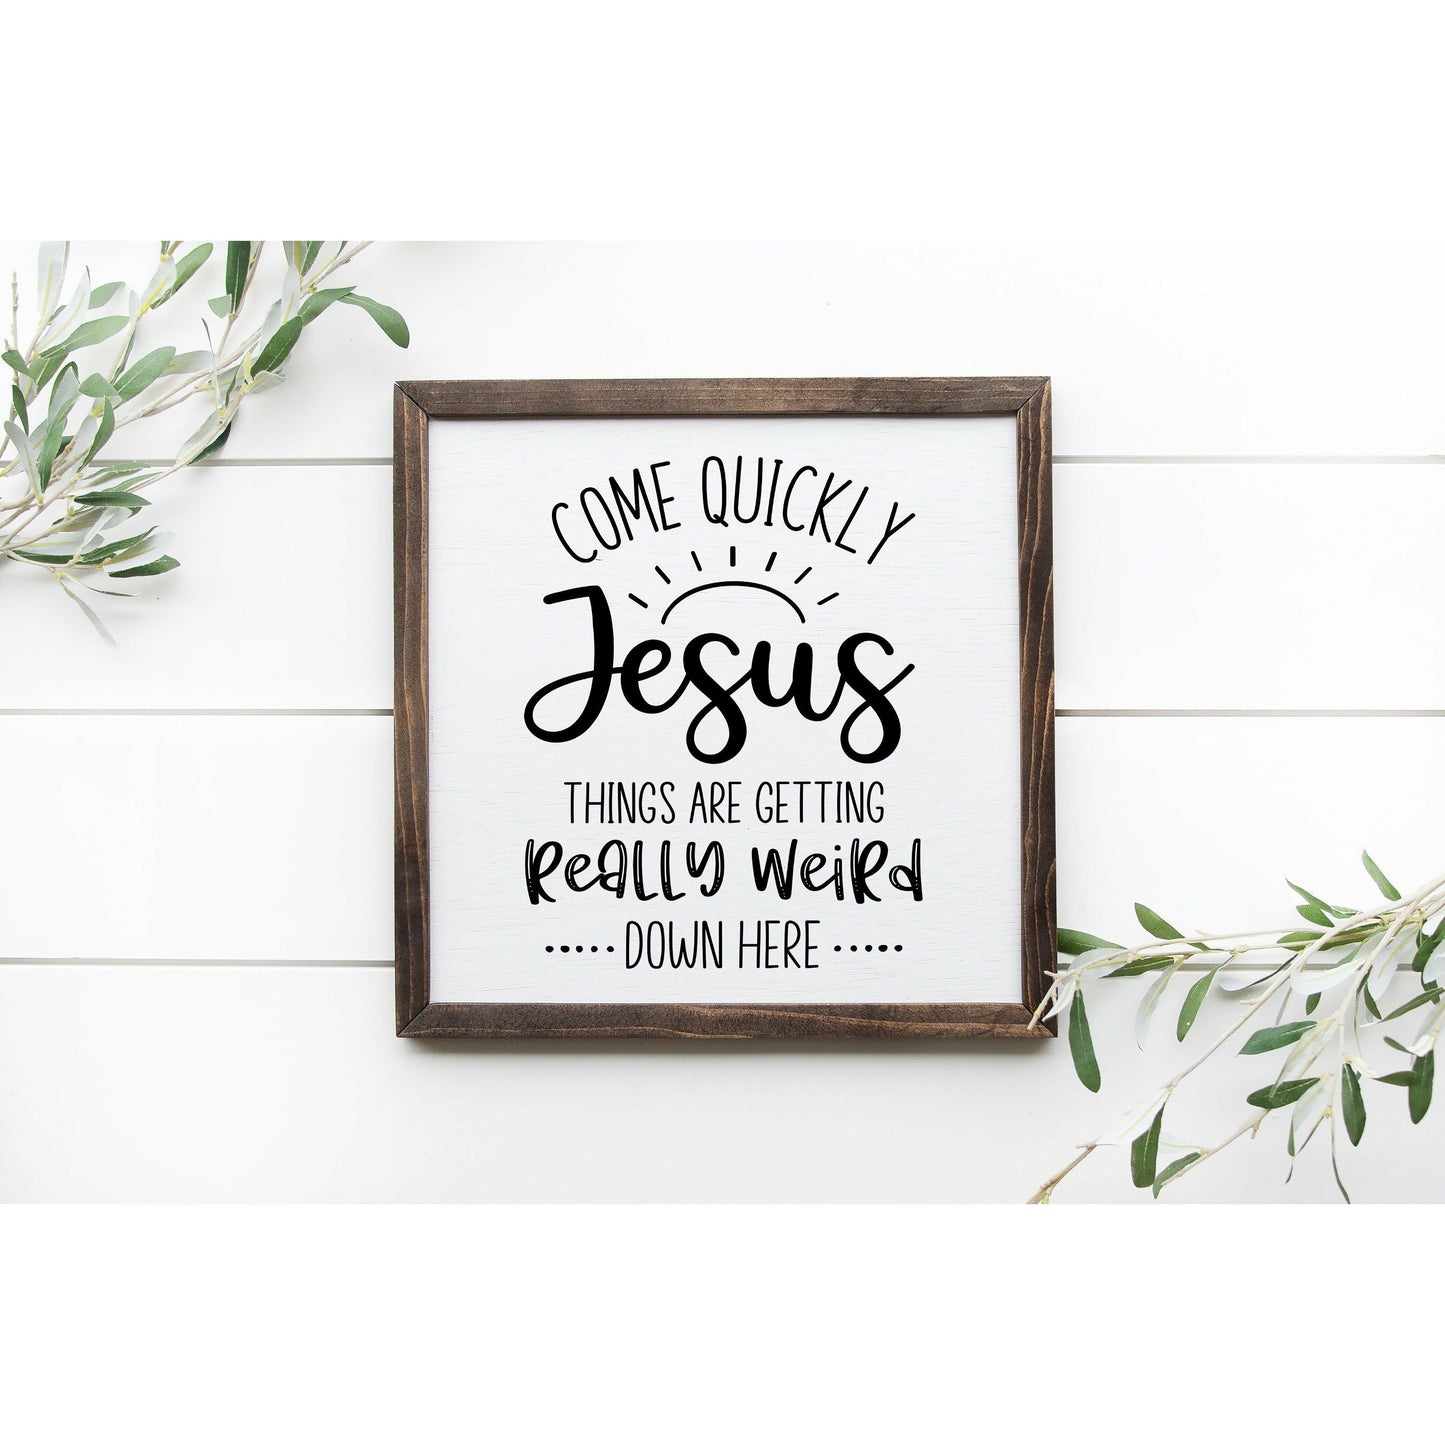 Come Quickly Jesus - Rustic Wooden Wall Art Sign